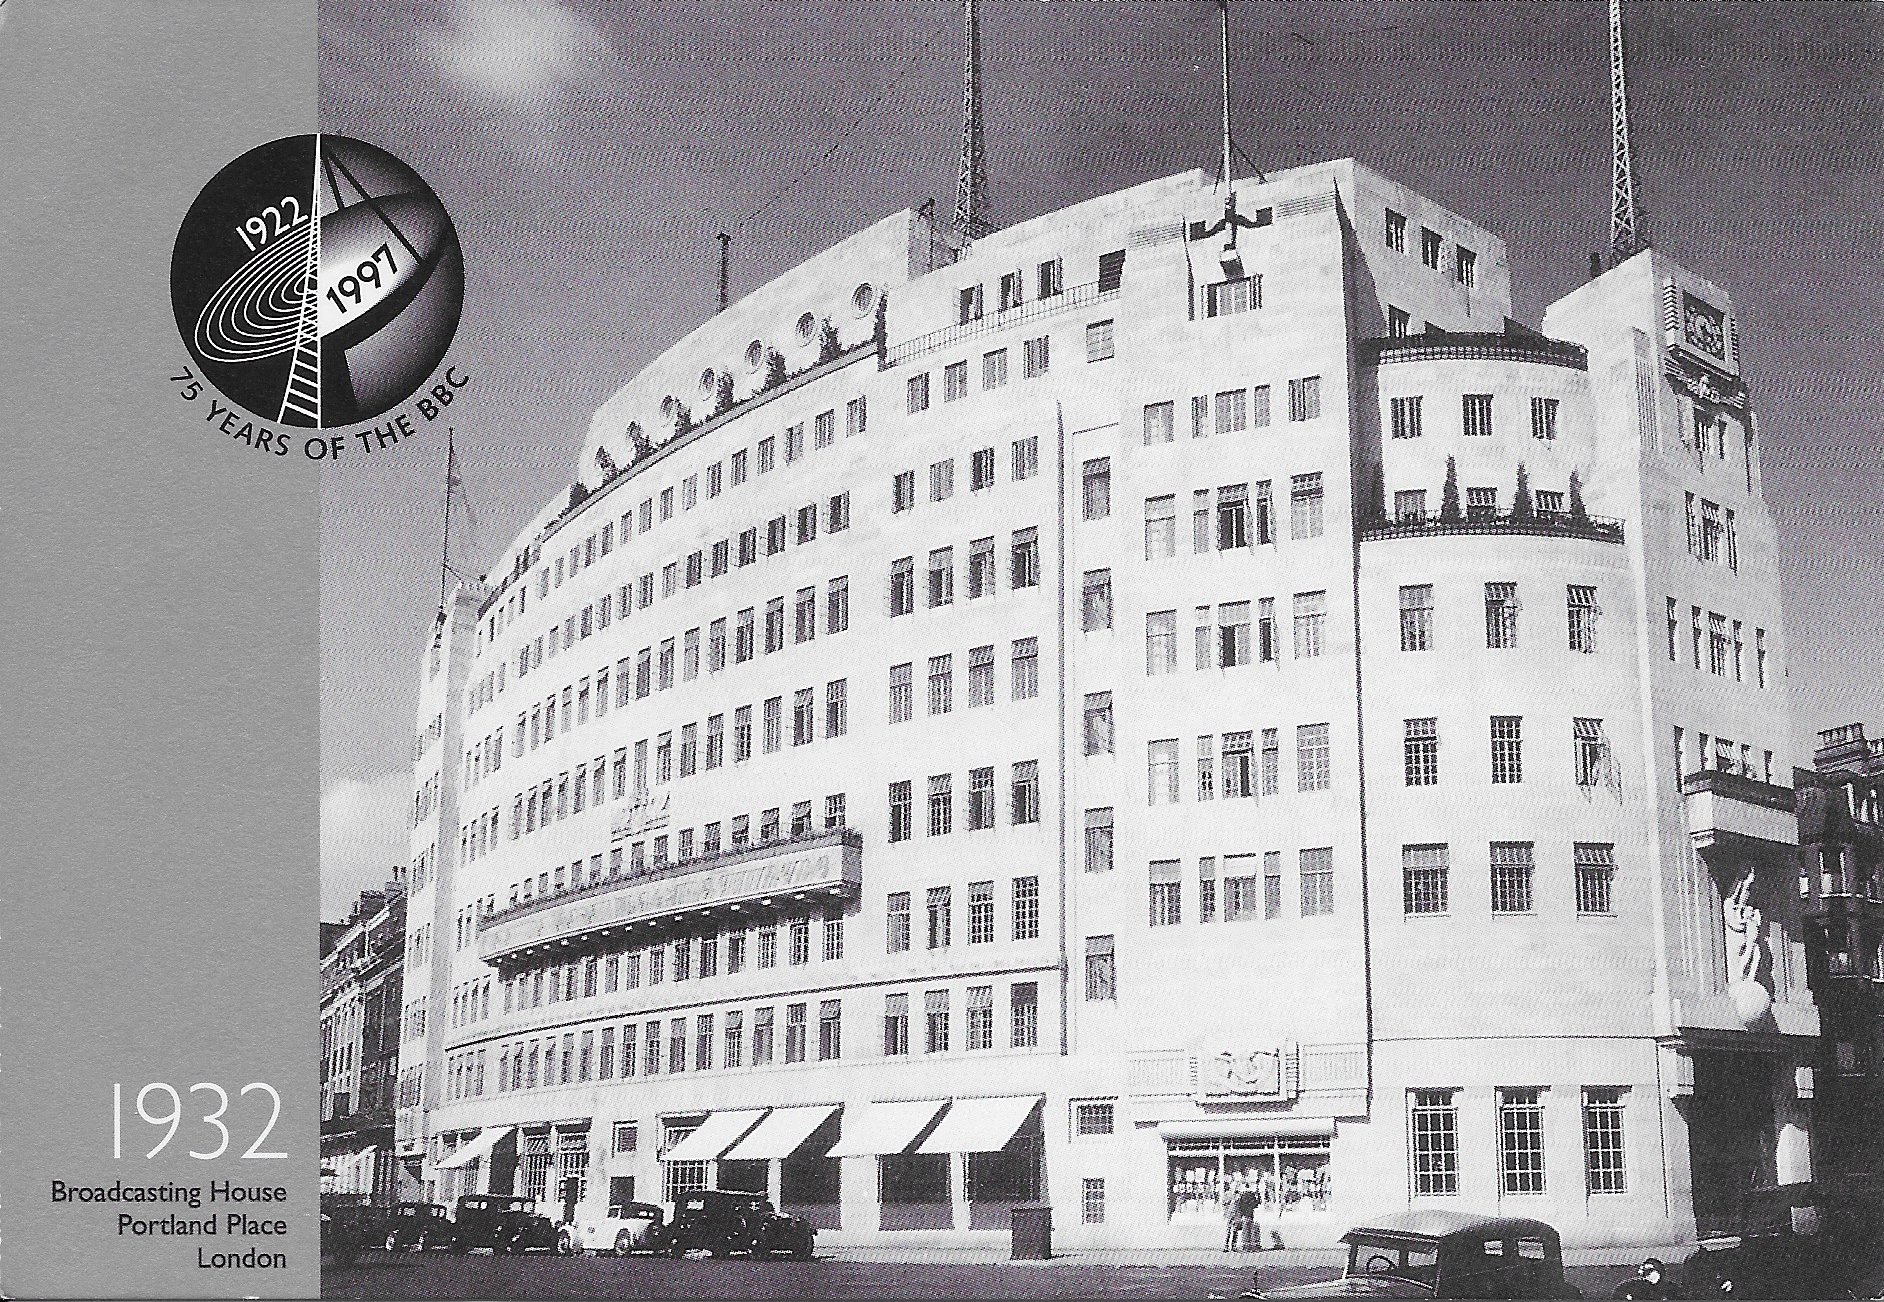 Picture of PC-BBC75-1932 75 years of the BBC - Broadcasting House by artist Unknown from the BBC postcards - Records and Tapes library